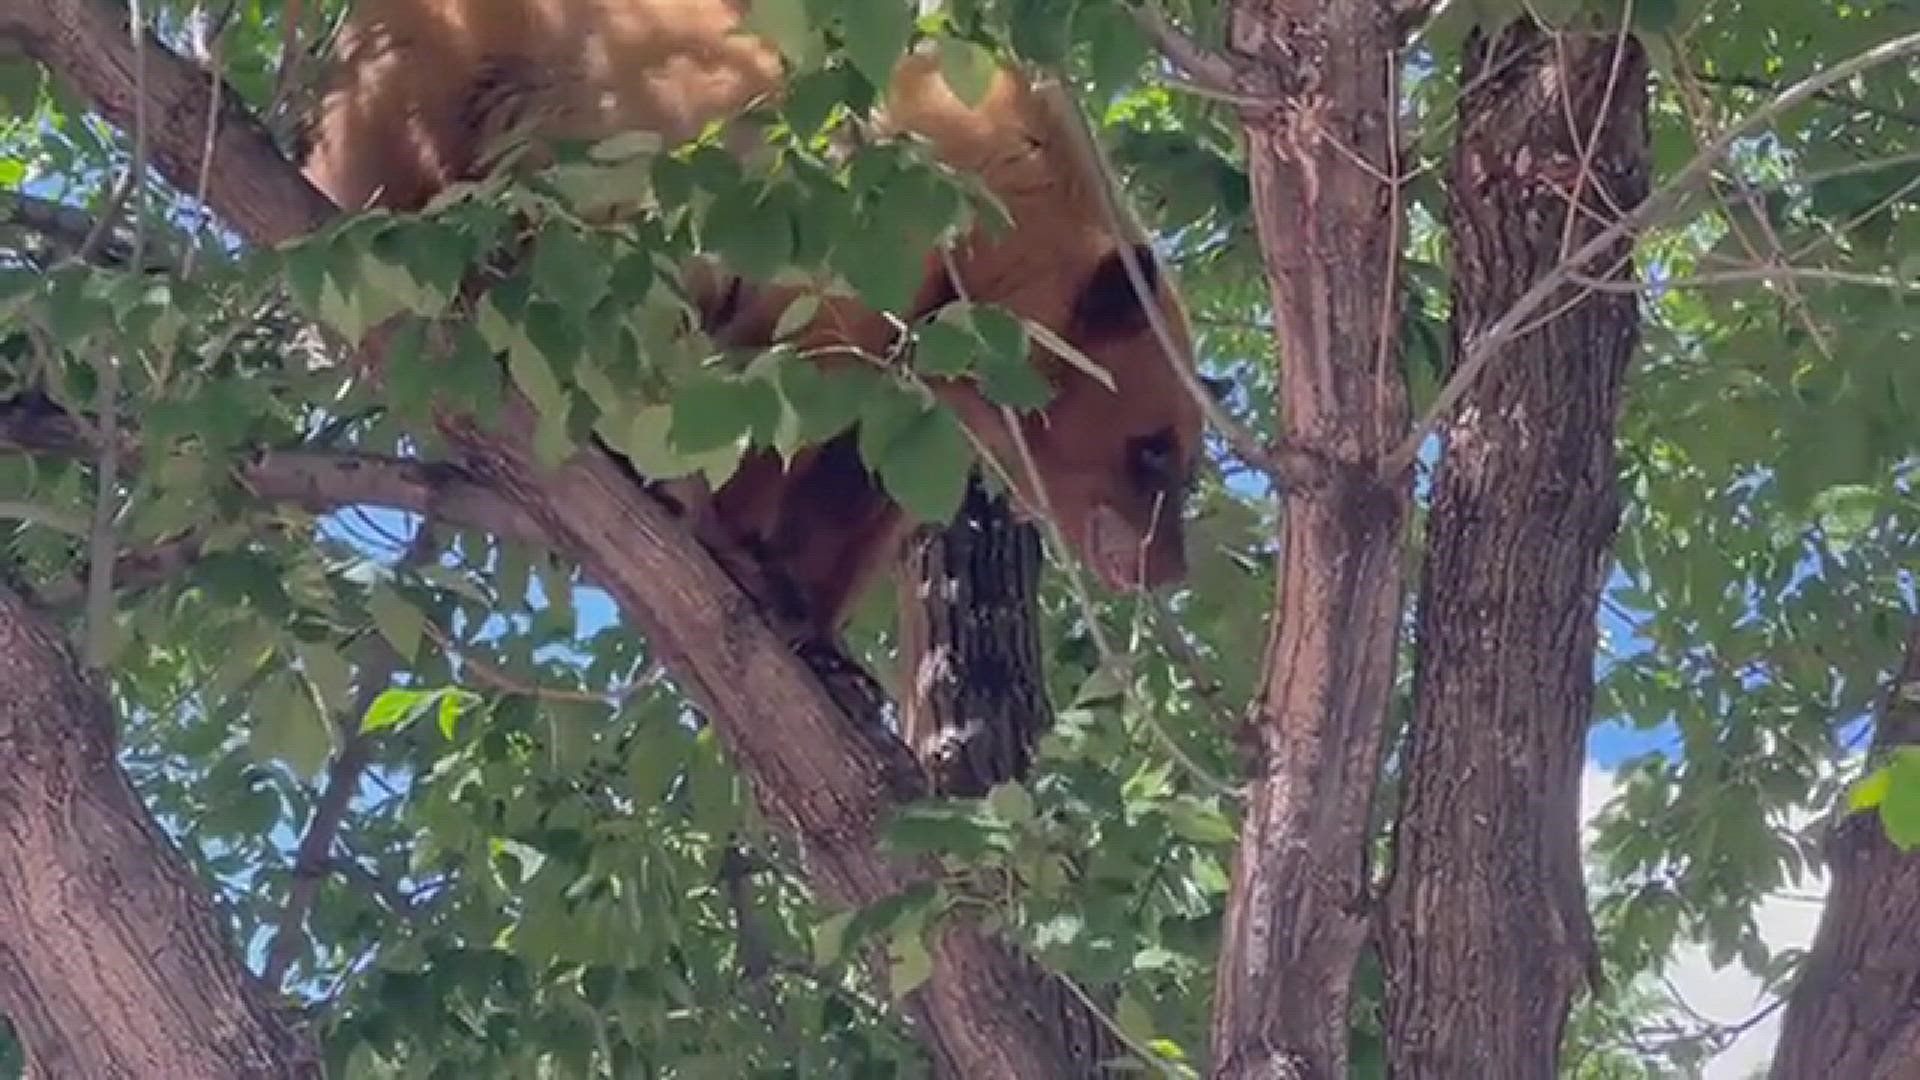 Colorado Parks and Wildlife tweeted video of a bear stuck in a tree near a Safeway in Loveland.